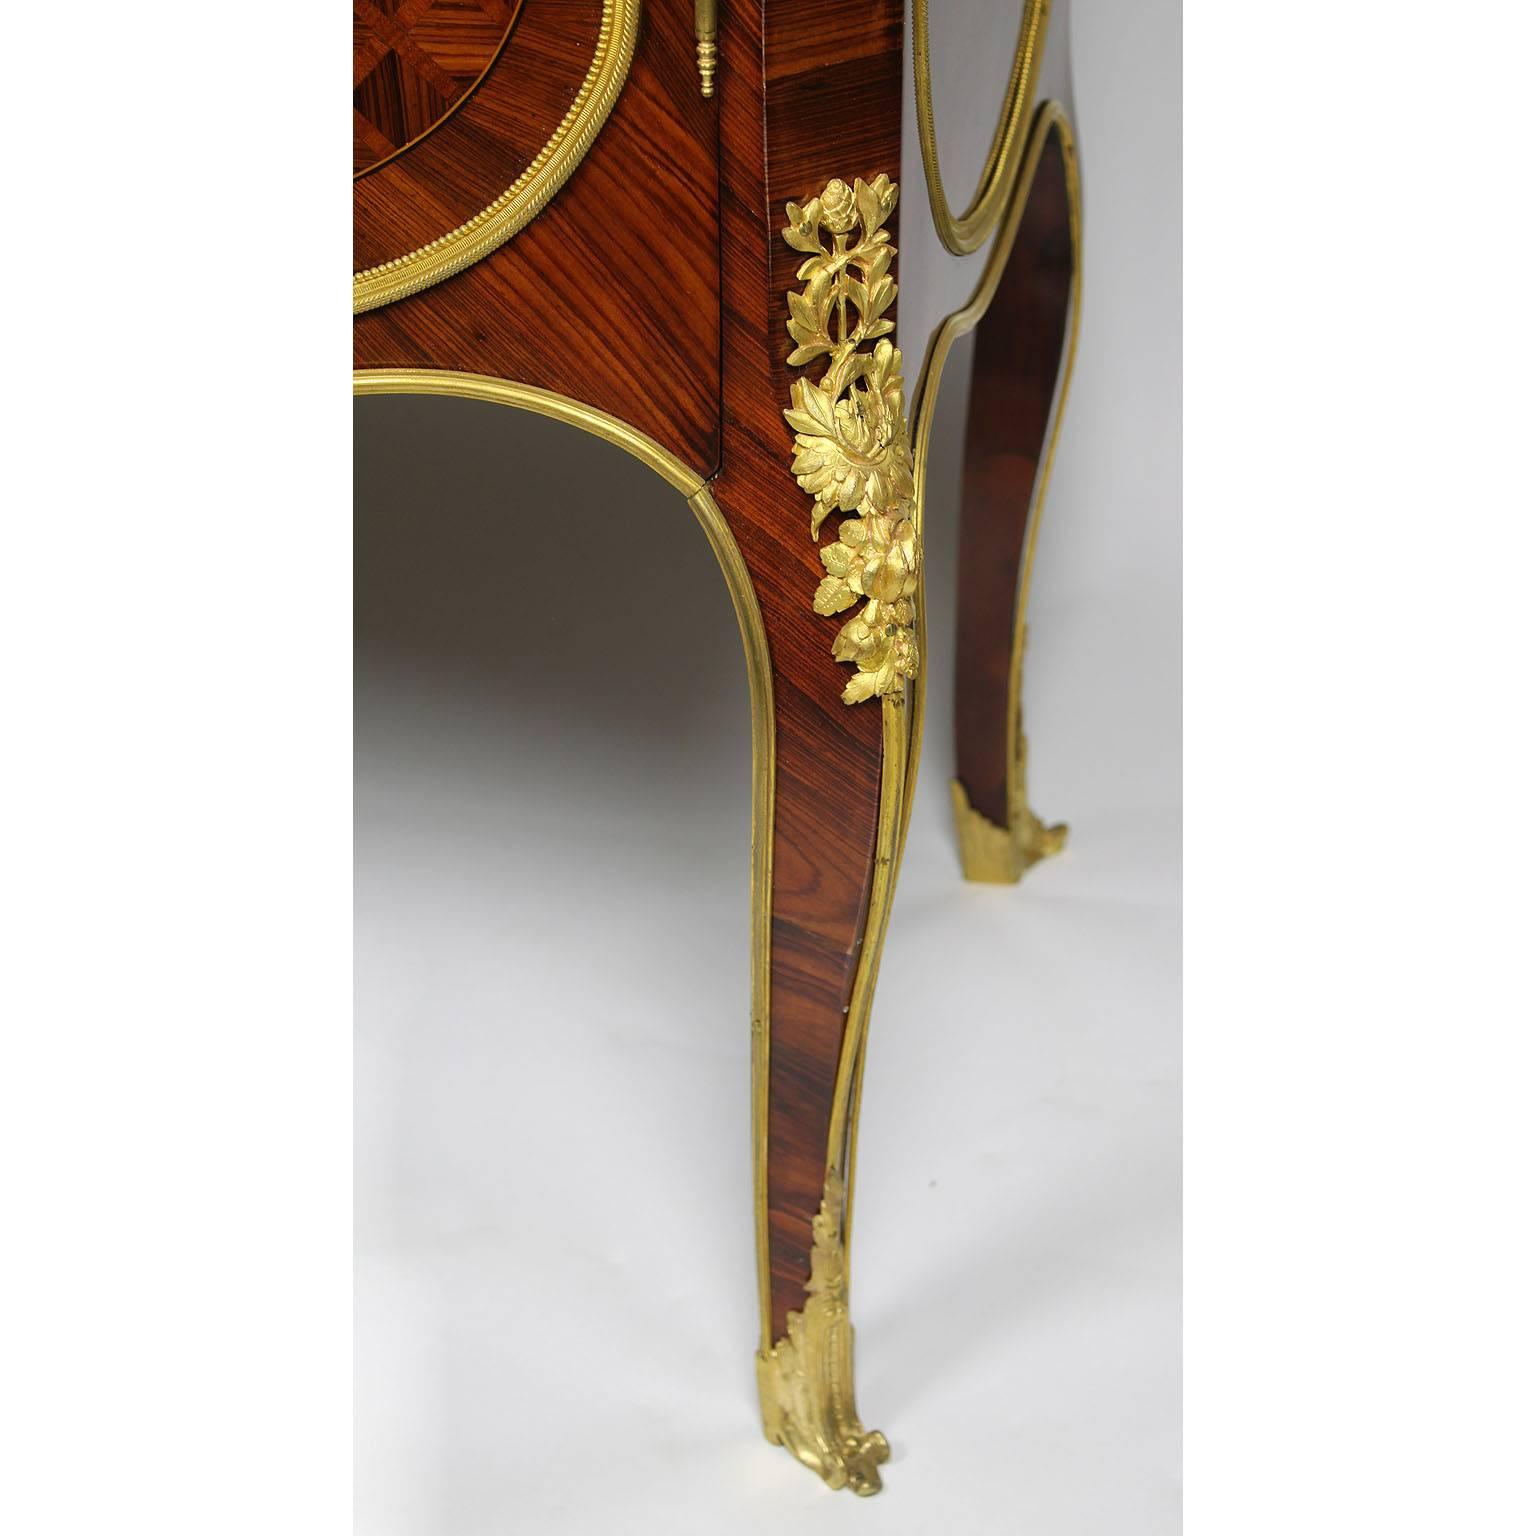 Early 20th Century Louis XV Style Ormolu and Jasperware-Mounted Vitrine, François Linke Attributed For Sale